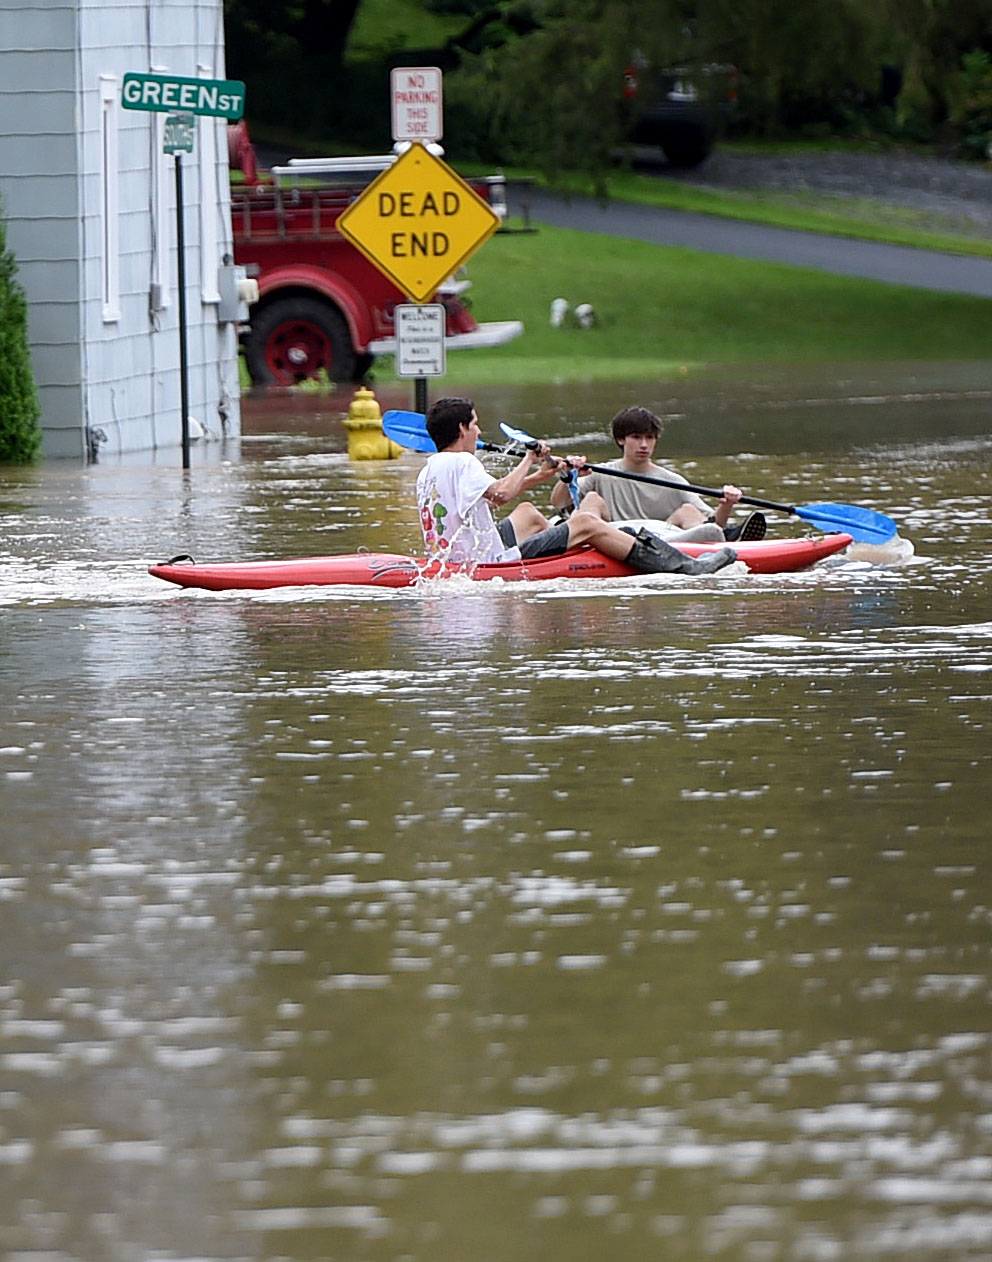 Kayakers take advantage of the flooding on South Street in Camillus August 19, 2021. Heavy rains again created flooding in Central New York with much of the flooding occurring along Ninemile Creek in Camillus and Marcellus. Dennis Nett | dnett@syracuse.com